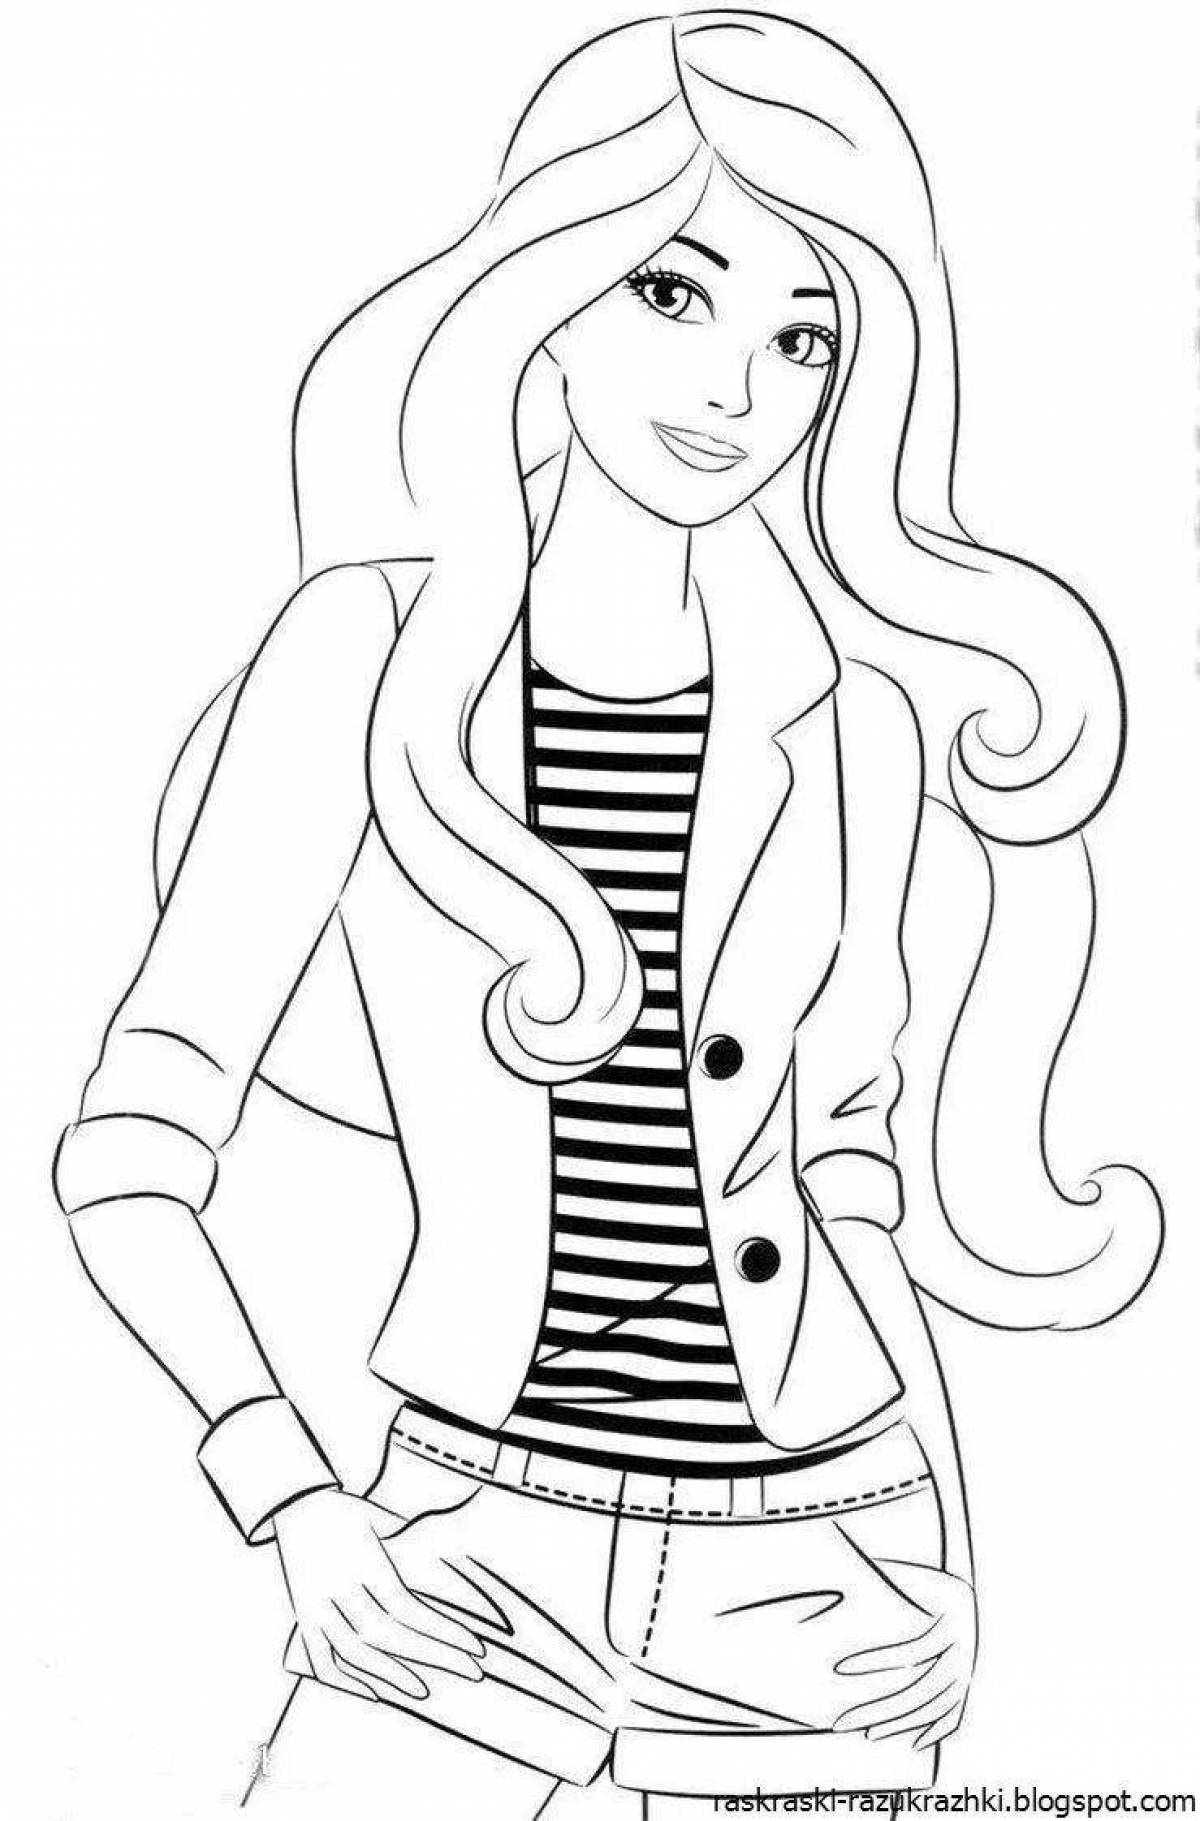 Vogue coloring page girls 12 years old fashion